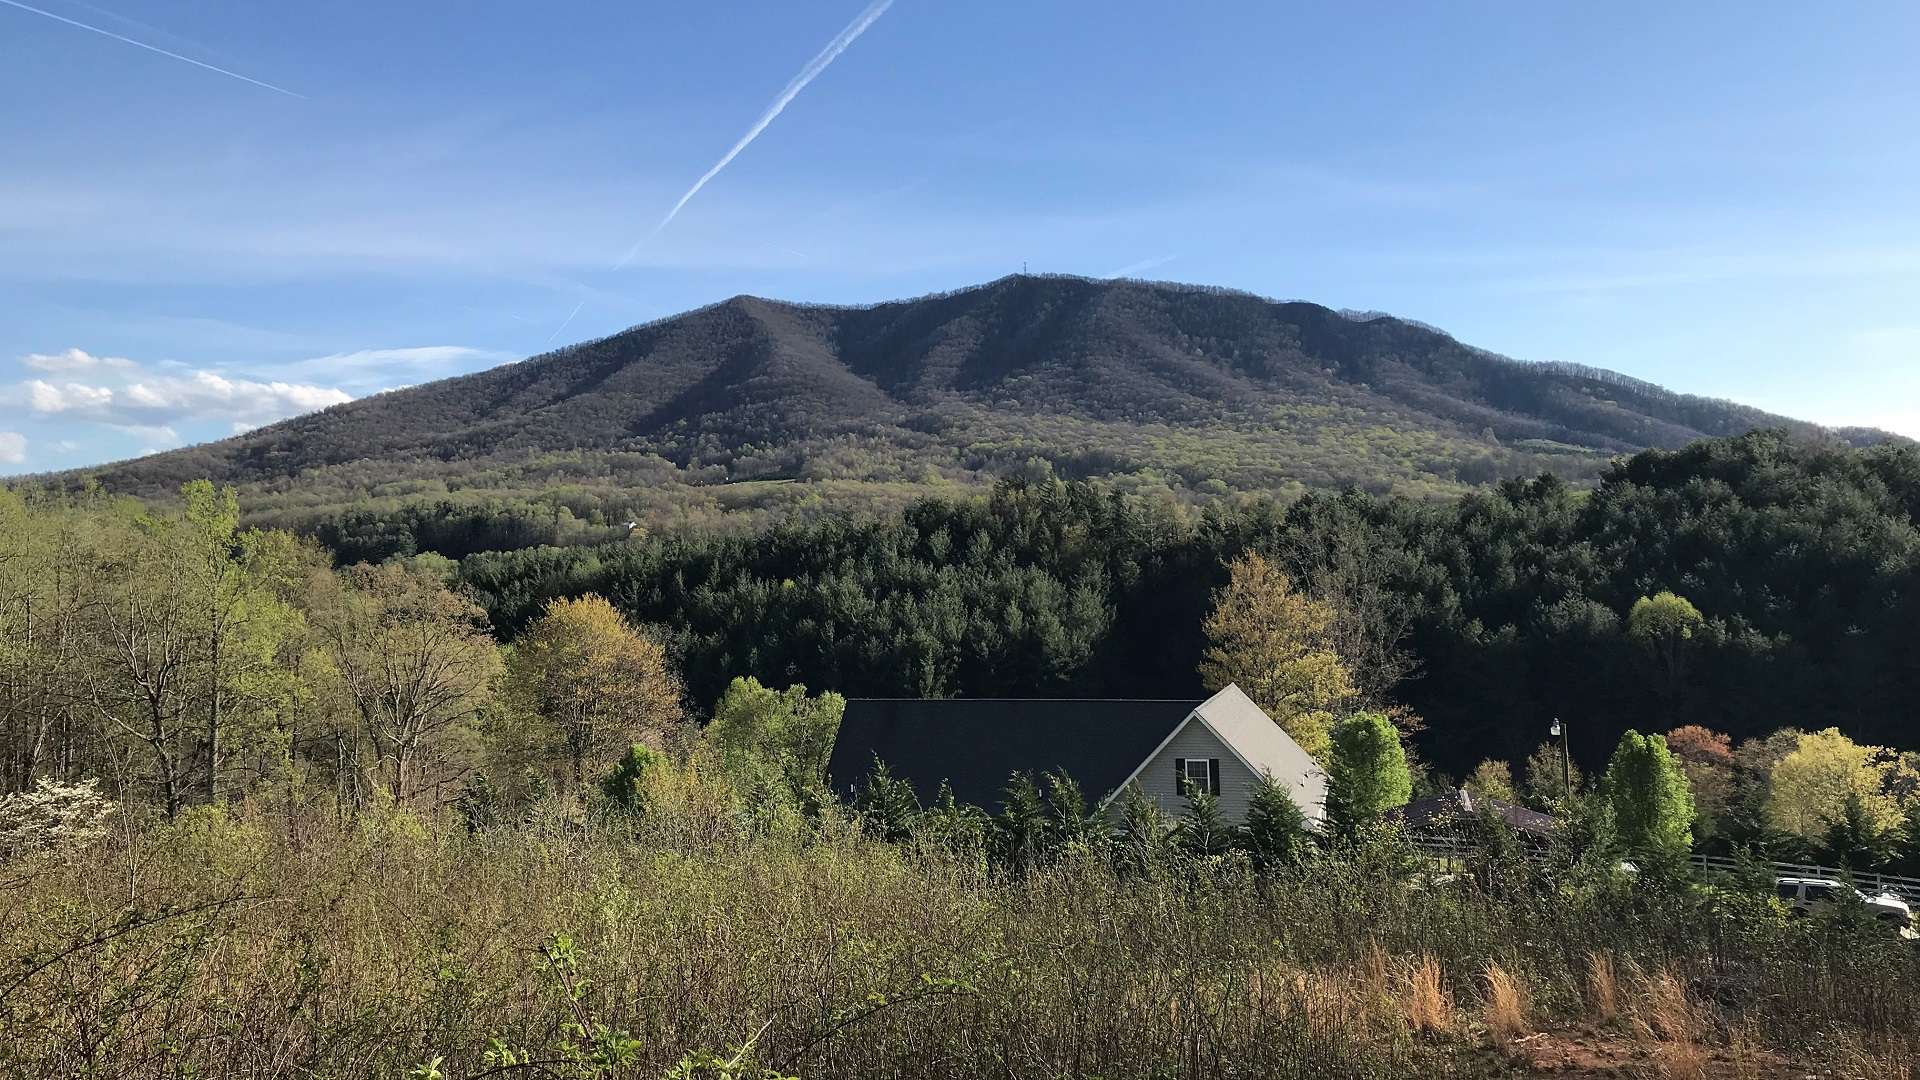 Great building lot just outside the Jefferson town limits in the established Hillside Oaks subdivision.  All the amenities of being convenient to town, without the town taxes!  This lot already has a well and septic system installed, and a beautiful view of Mount Jefferson.